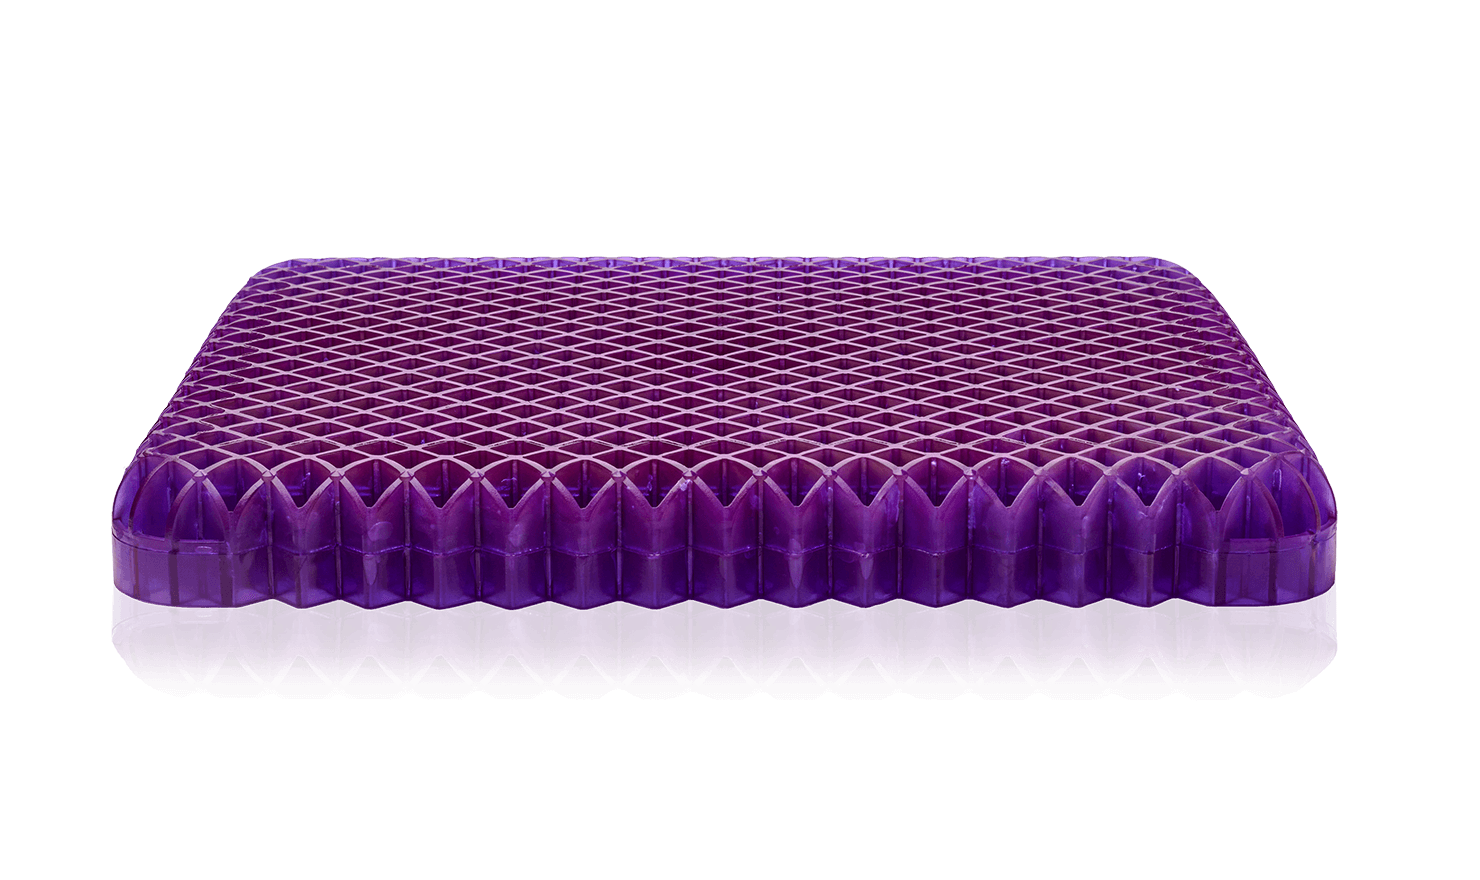 Purple Mattress Not Just Another, Purple King Size Bed